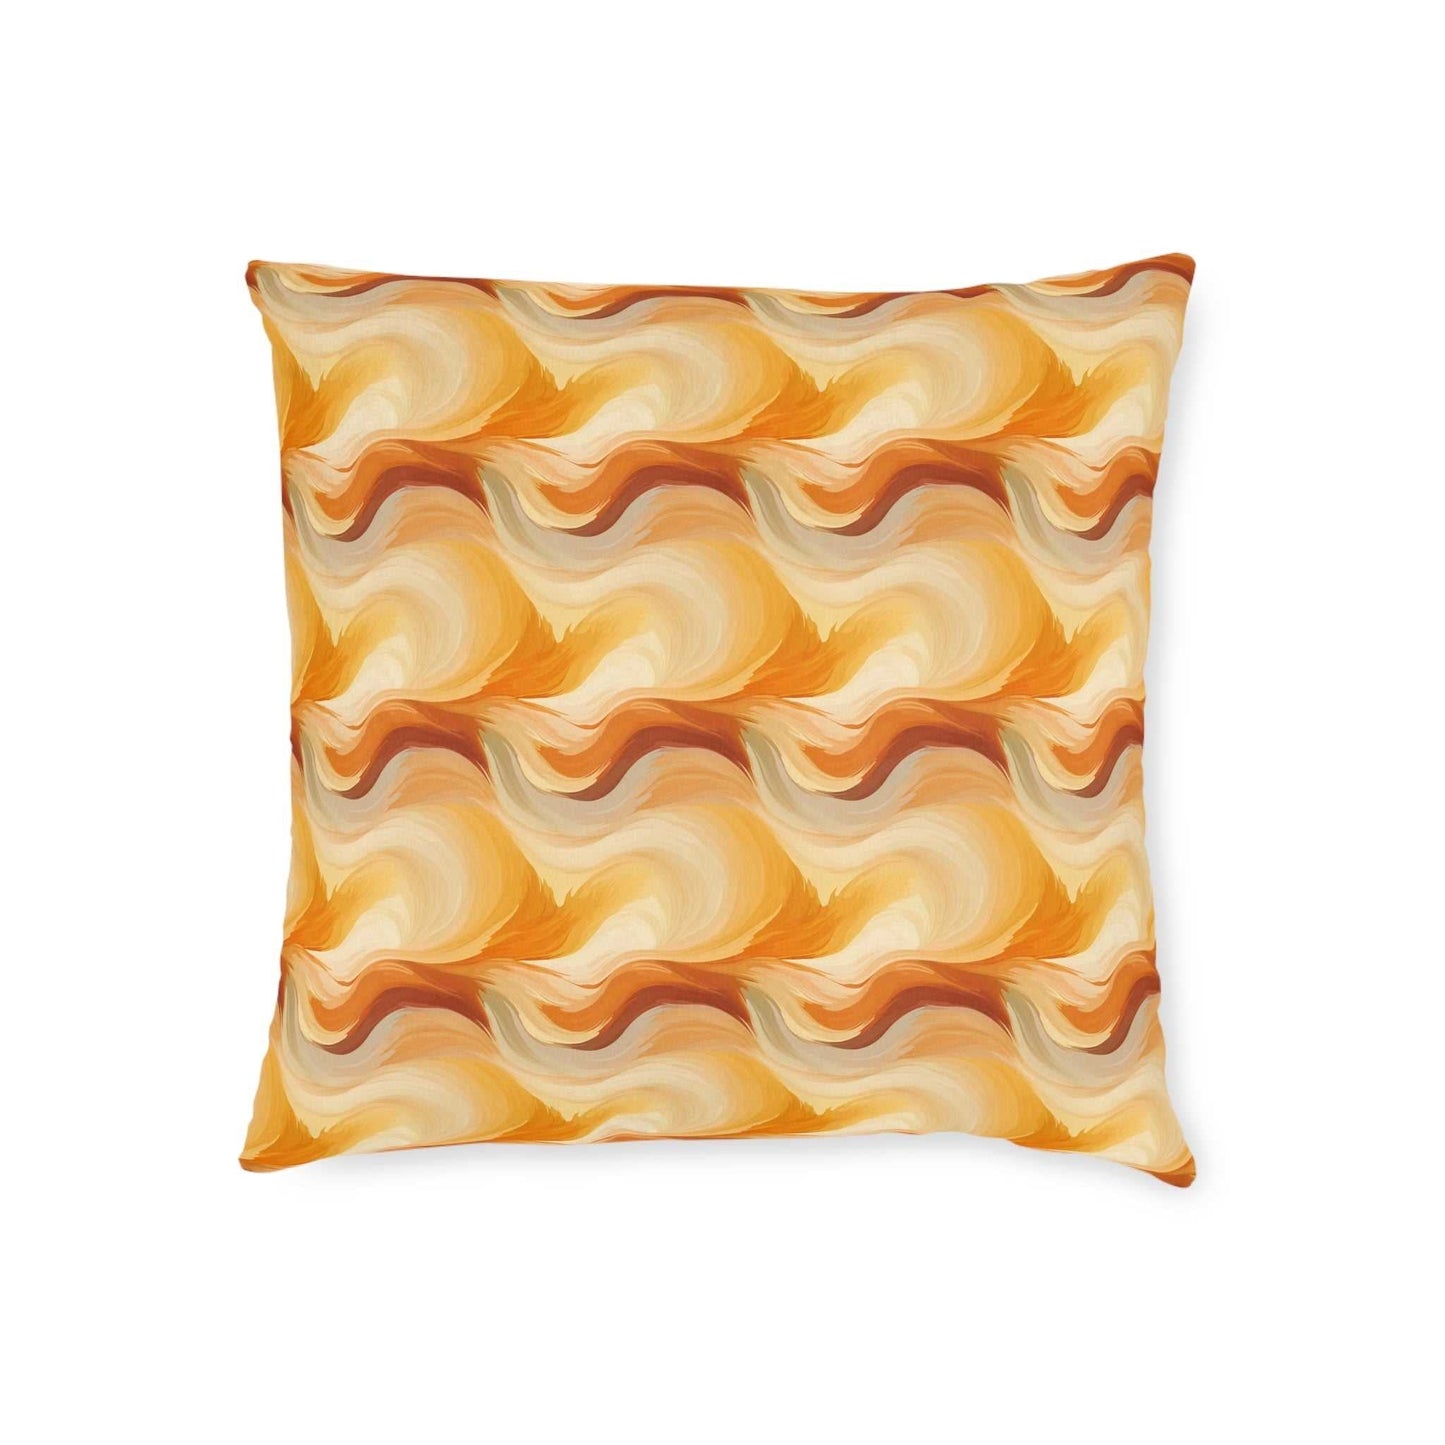 Amber Waves: The Breath of Autumn - Square Pillow - Pattern Symphony